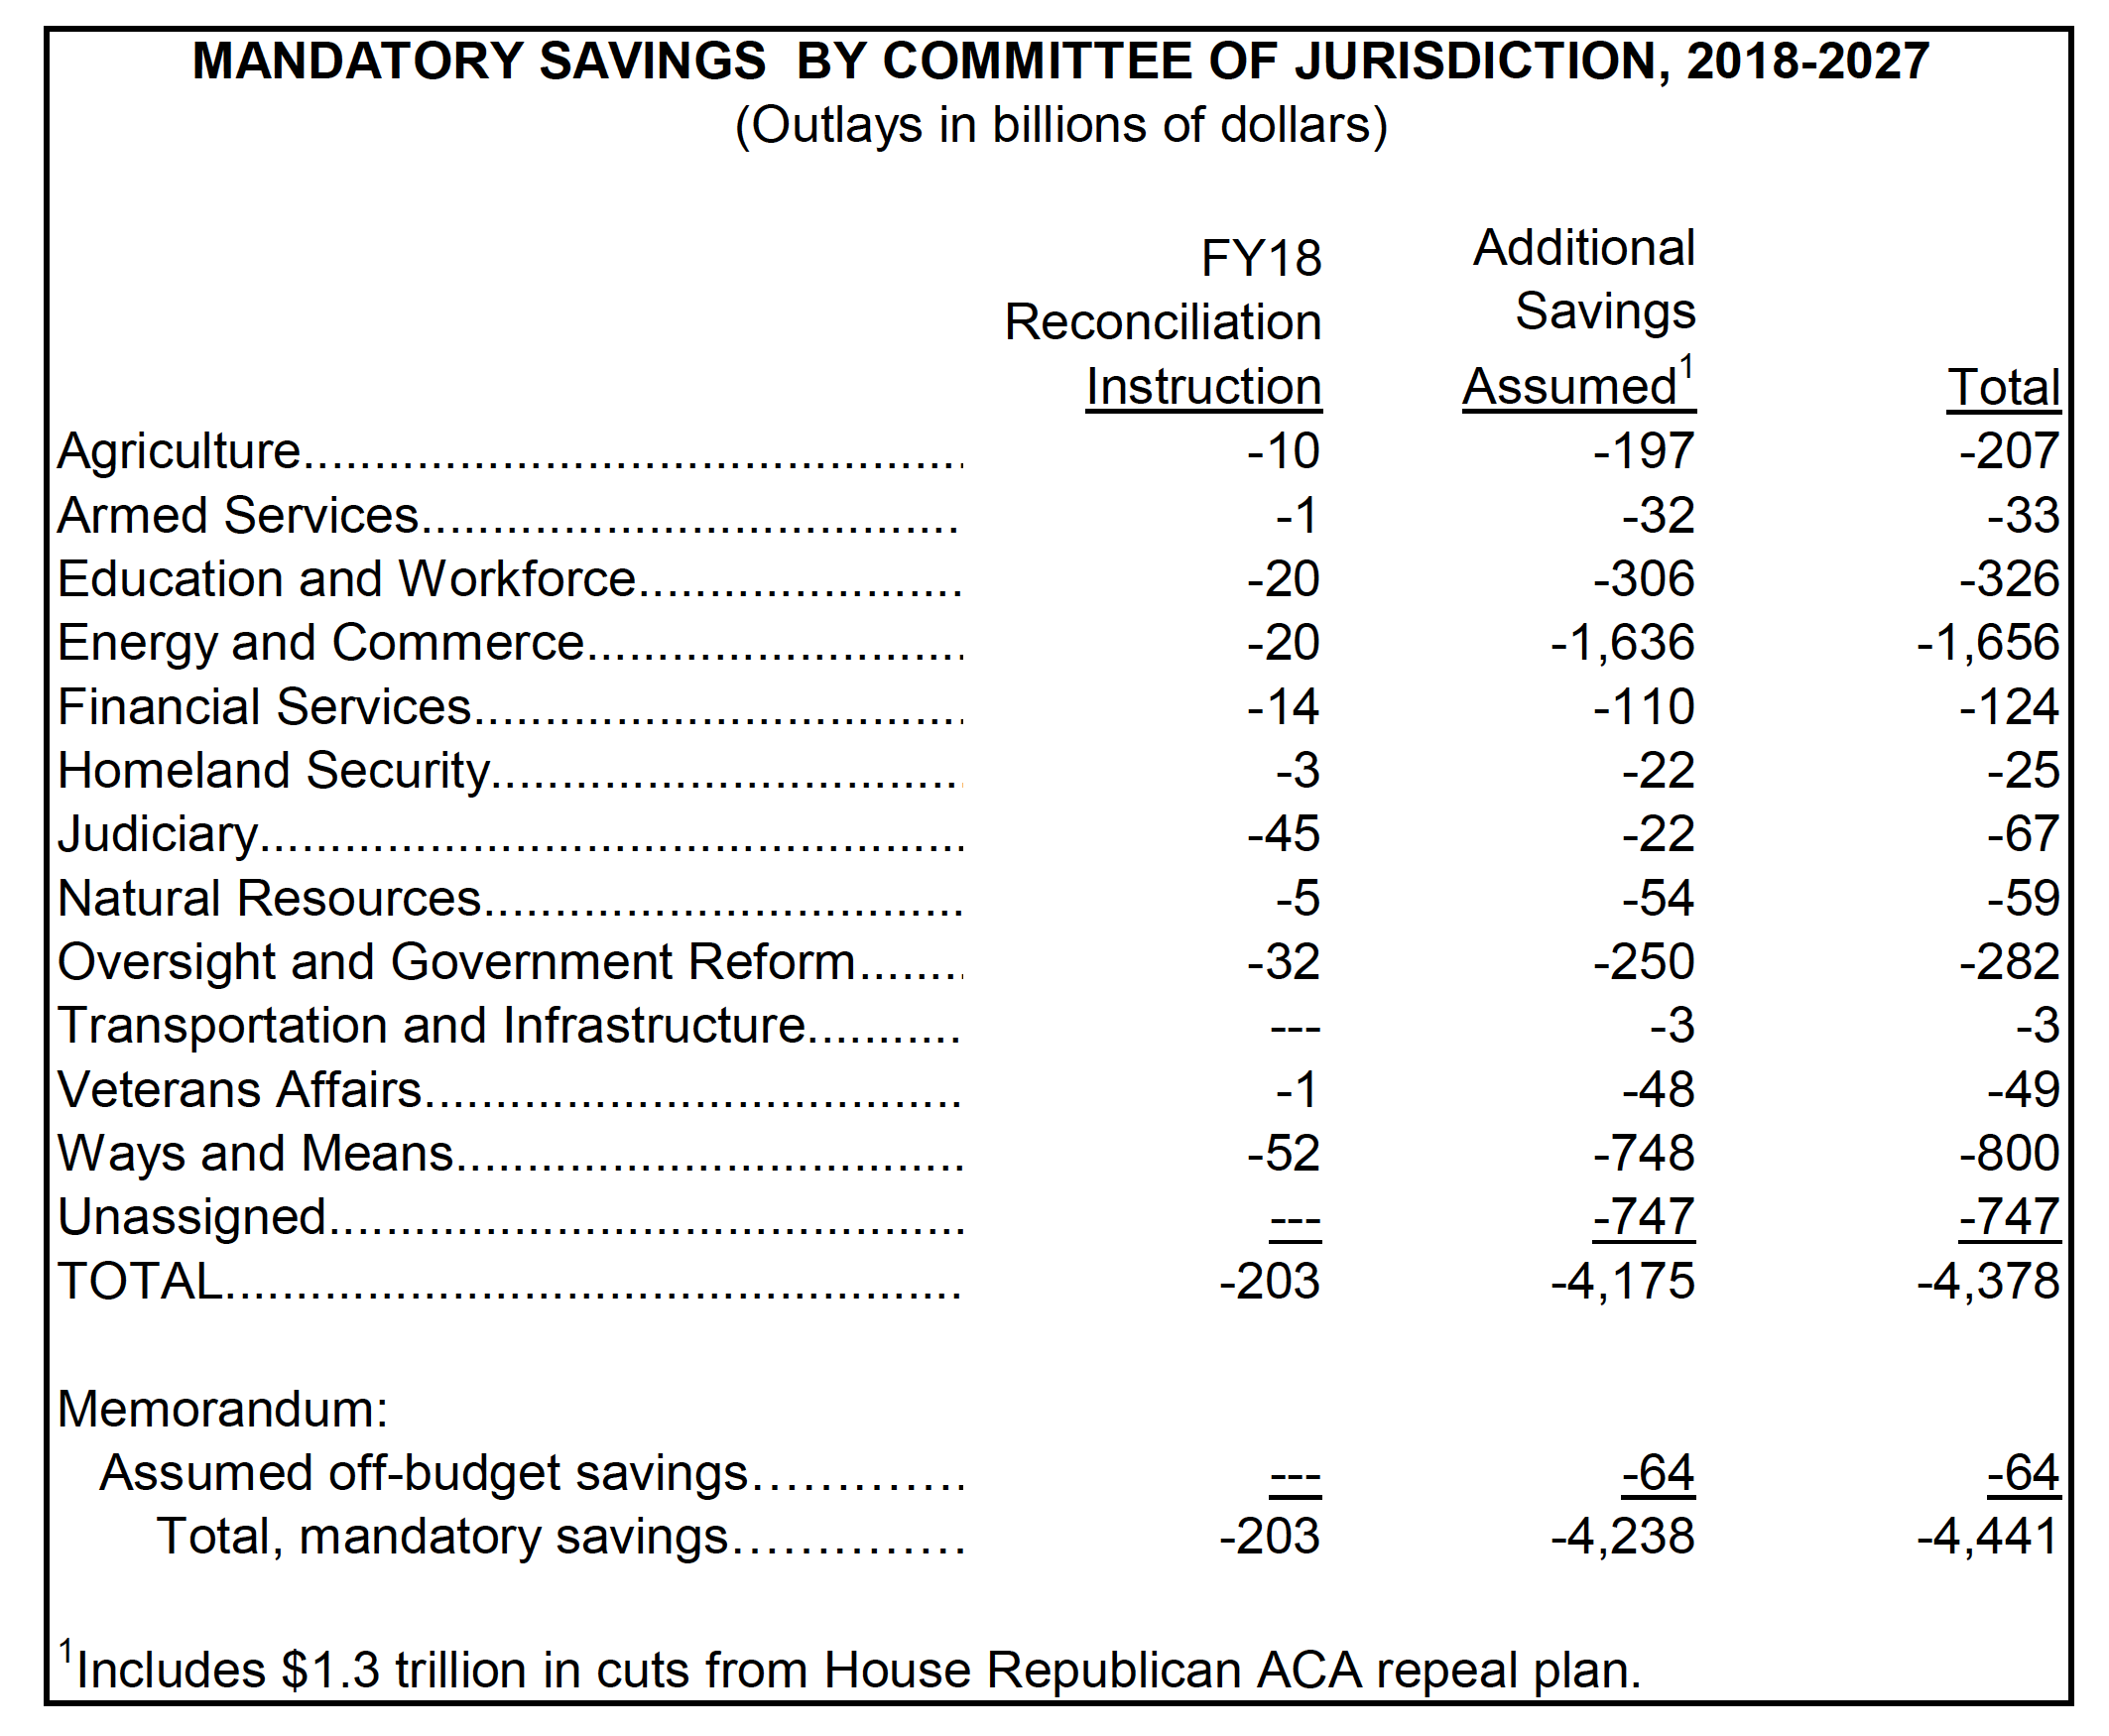 MANDATORY SAVINGS BY COMMITTEE OF JURISDICTION, 2018-2027(Outlays in billions of dollars)